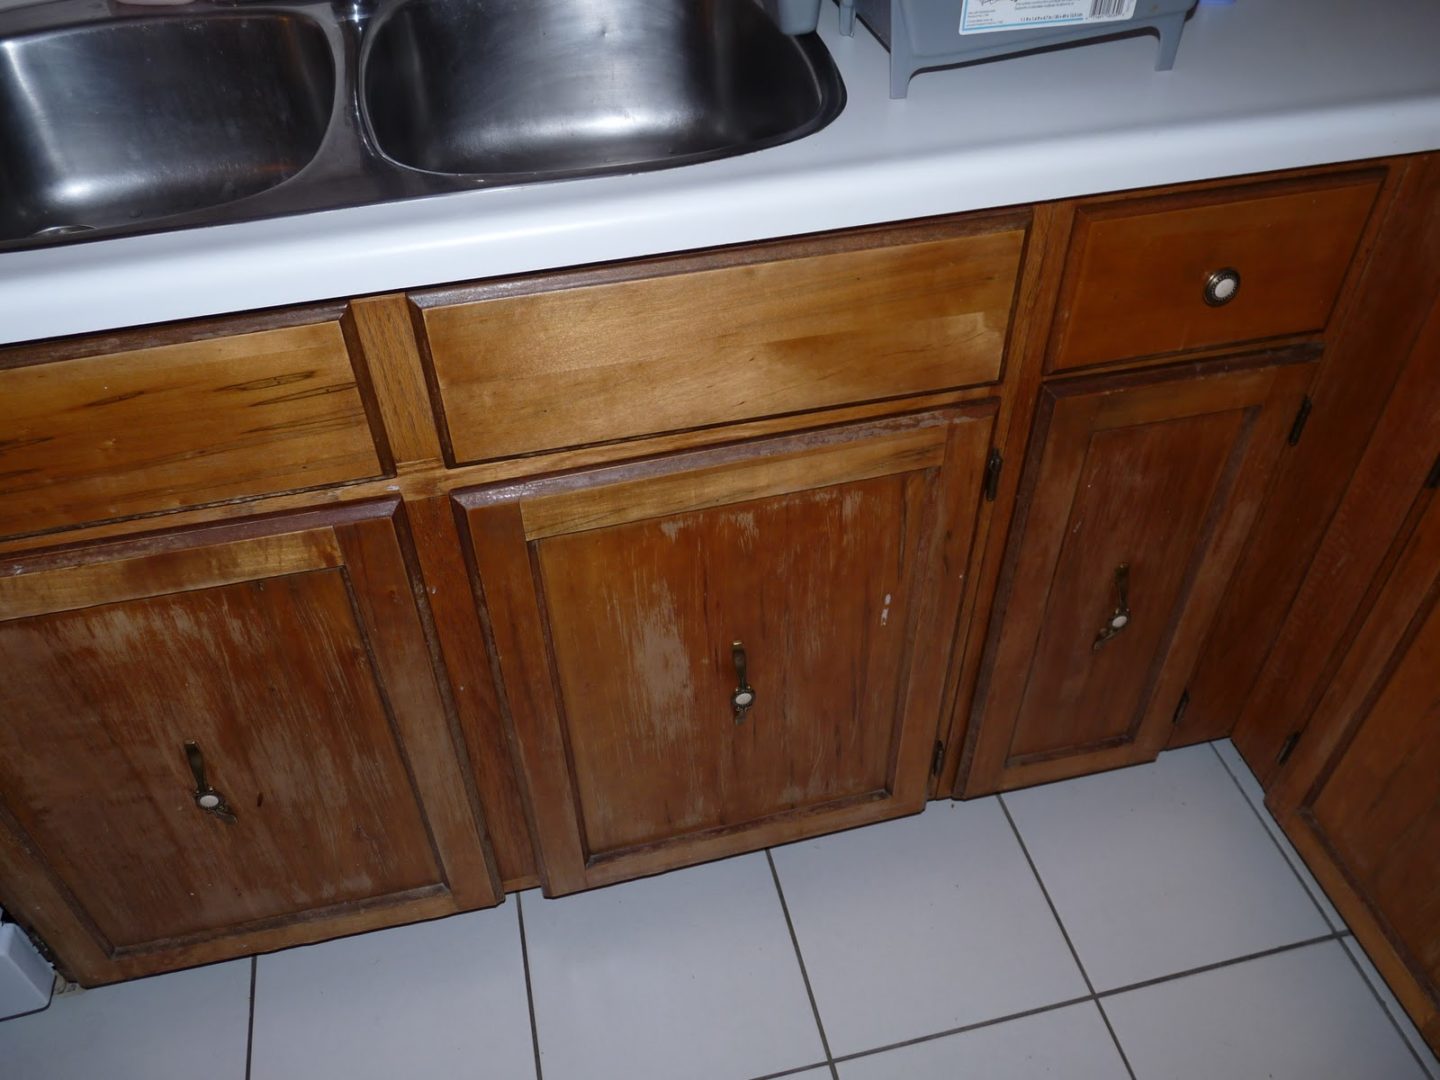 Diy Re Varnished Cabinet Fronts How To Restore Kitchen Cabinetry